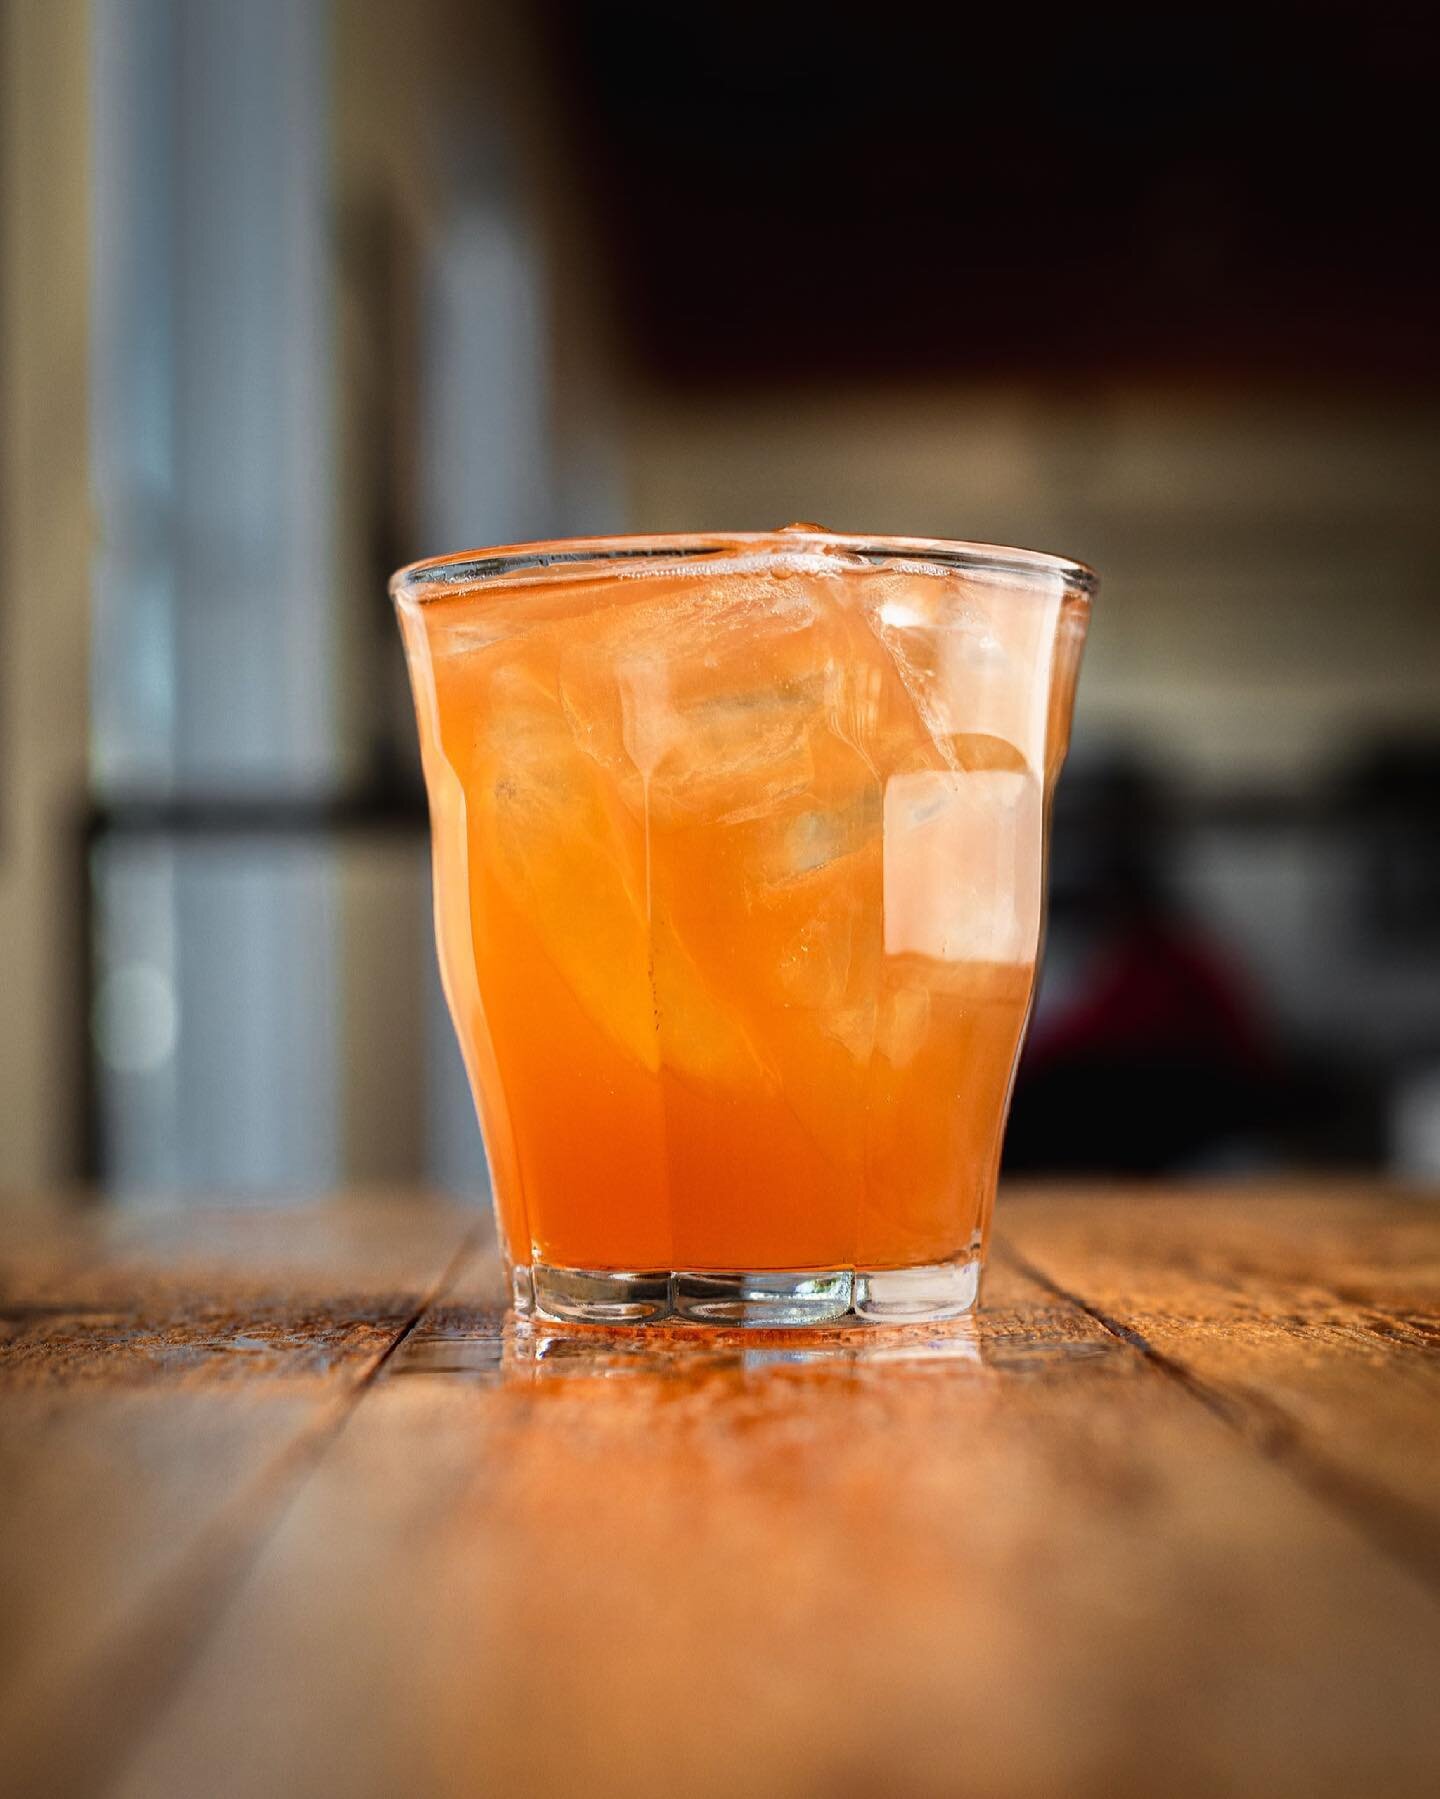 Cocktail Hour. On Saturday's, get $2 off any of Drinks Distilled's signature cocktails from 5-7. Currently mixing Bourbon Sours and APA Negronis!